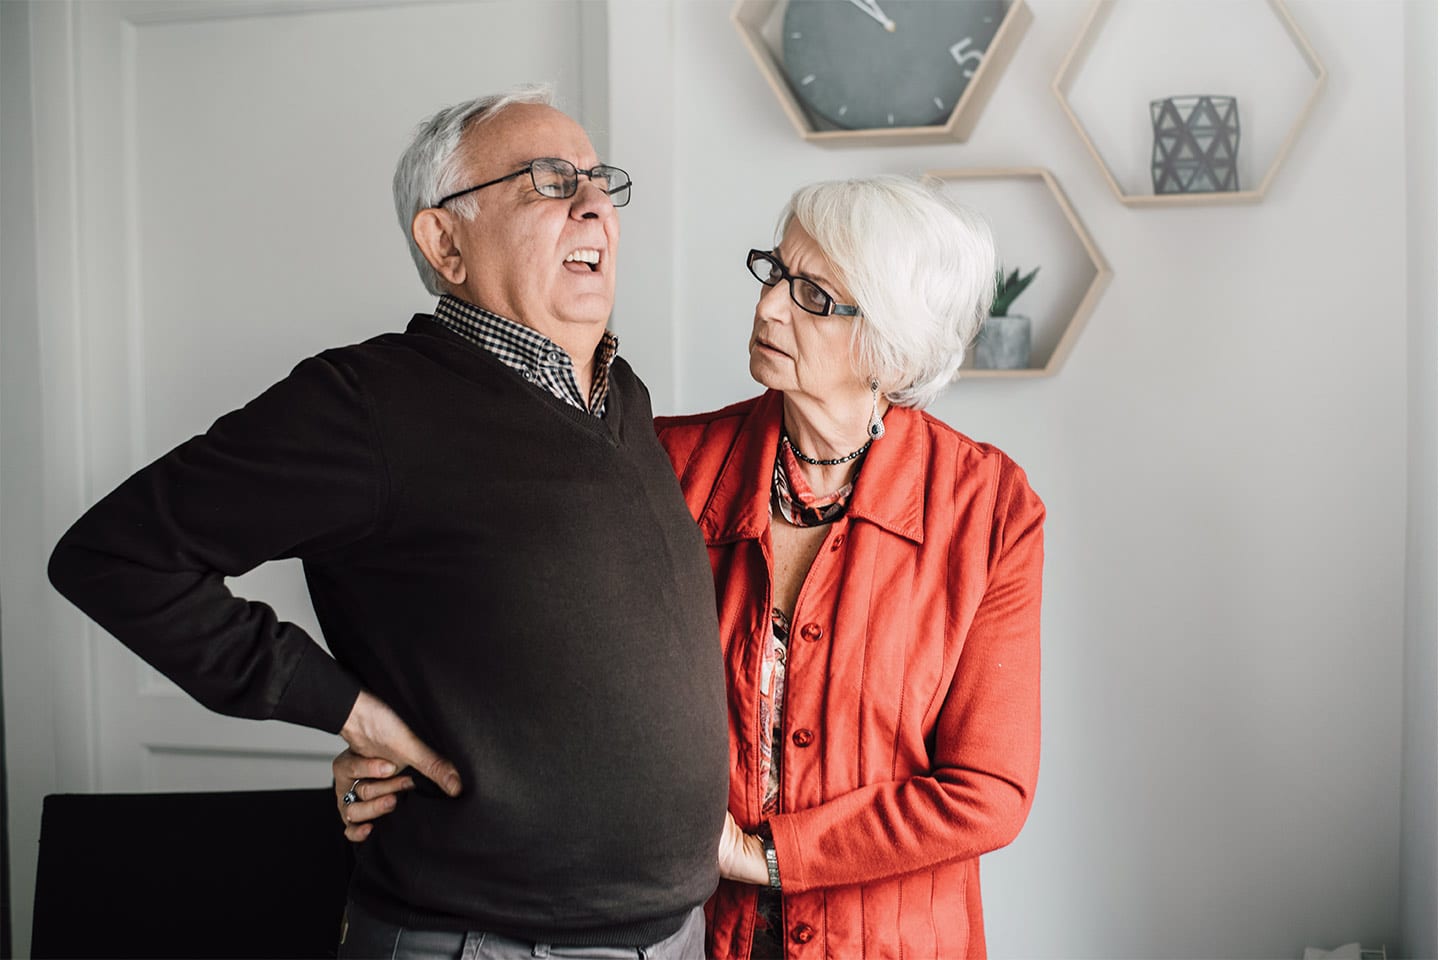 senior adult man with back pain and his concerned wife trying to help